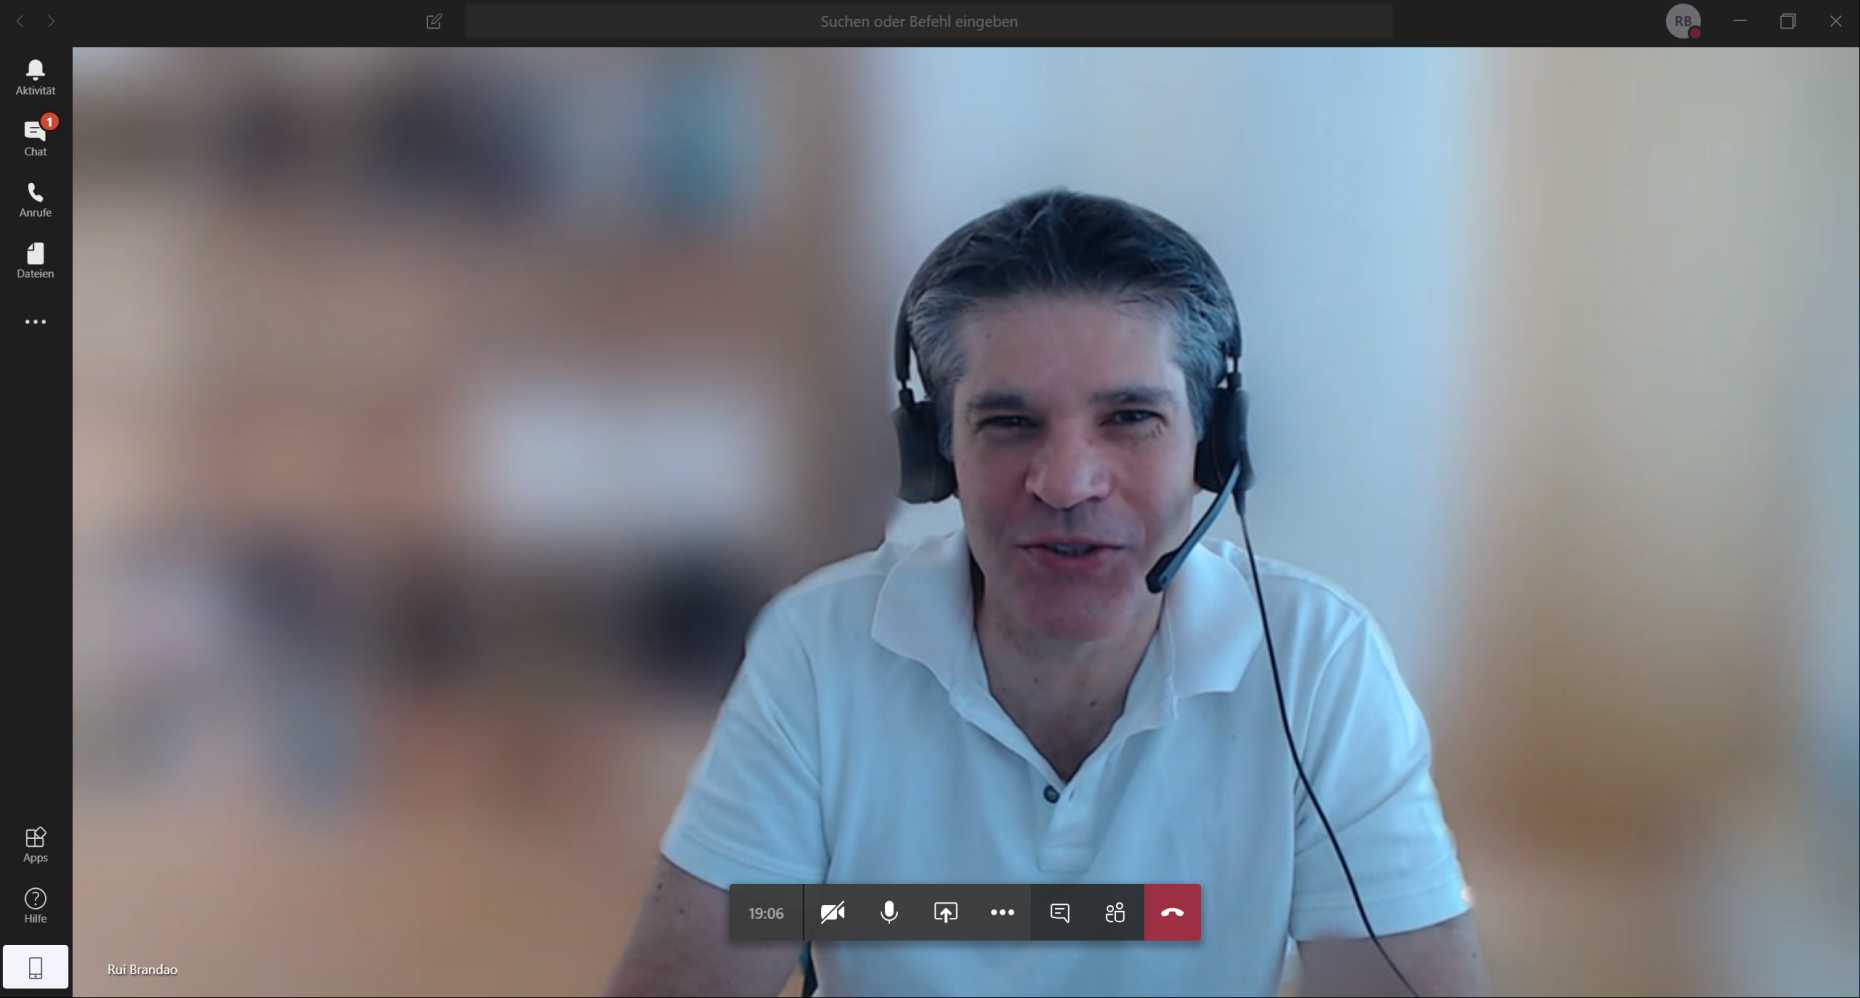 An interview with IT Services Director Rui Brandao over the Teams platform (photograph: Screenshot)